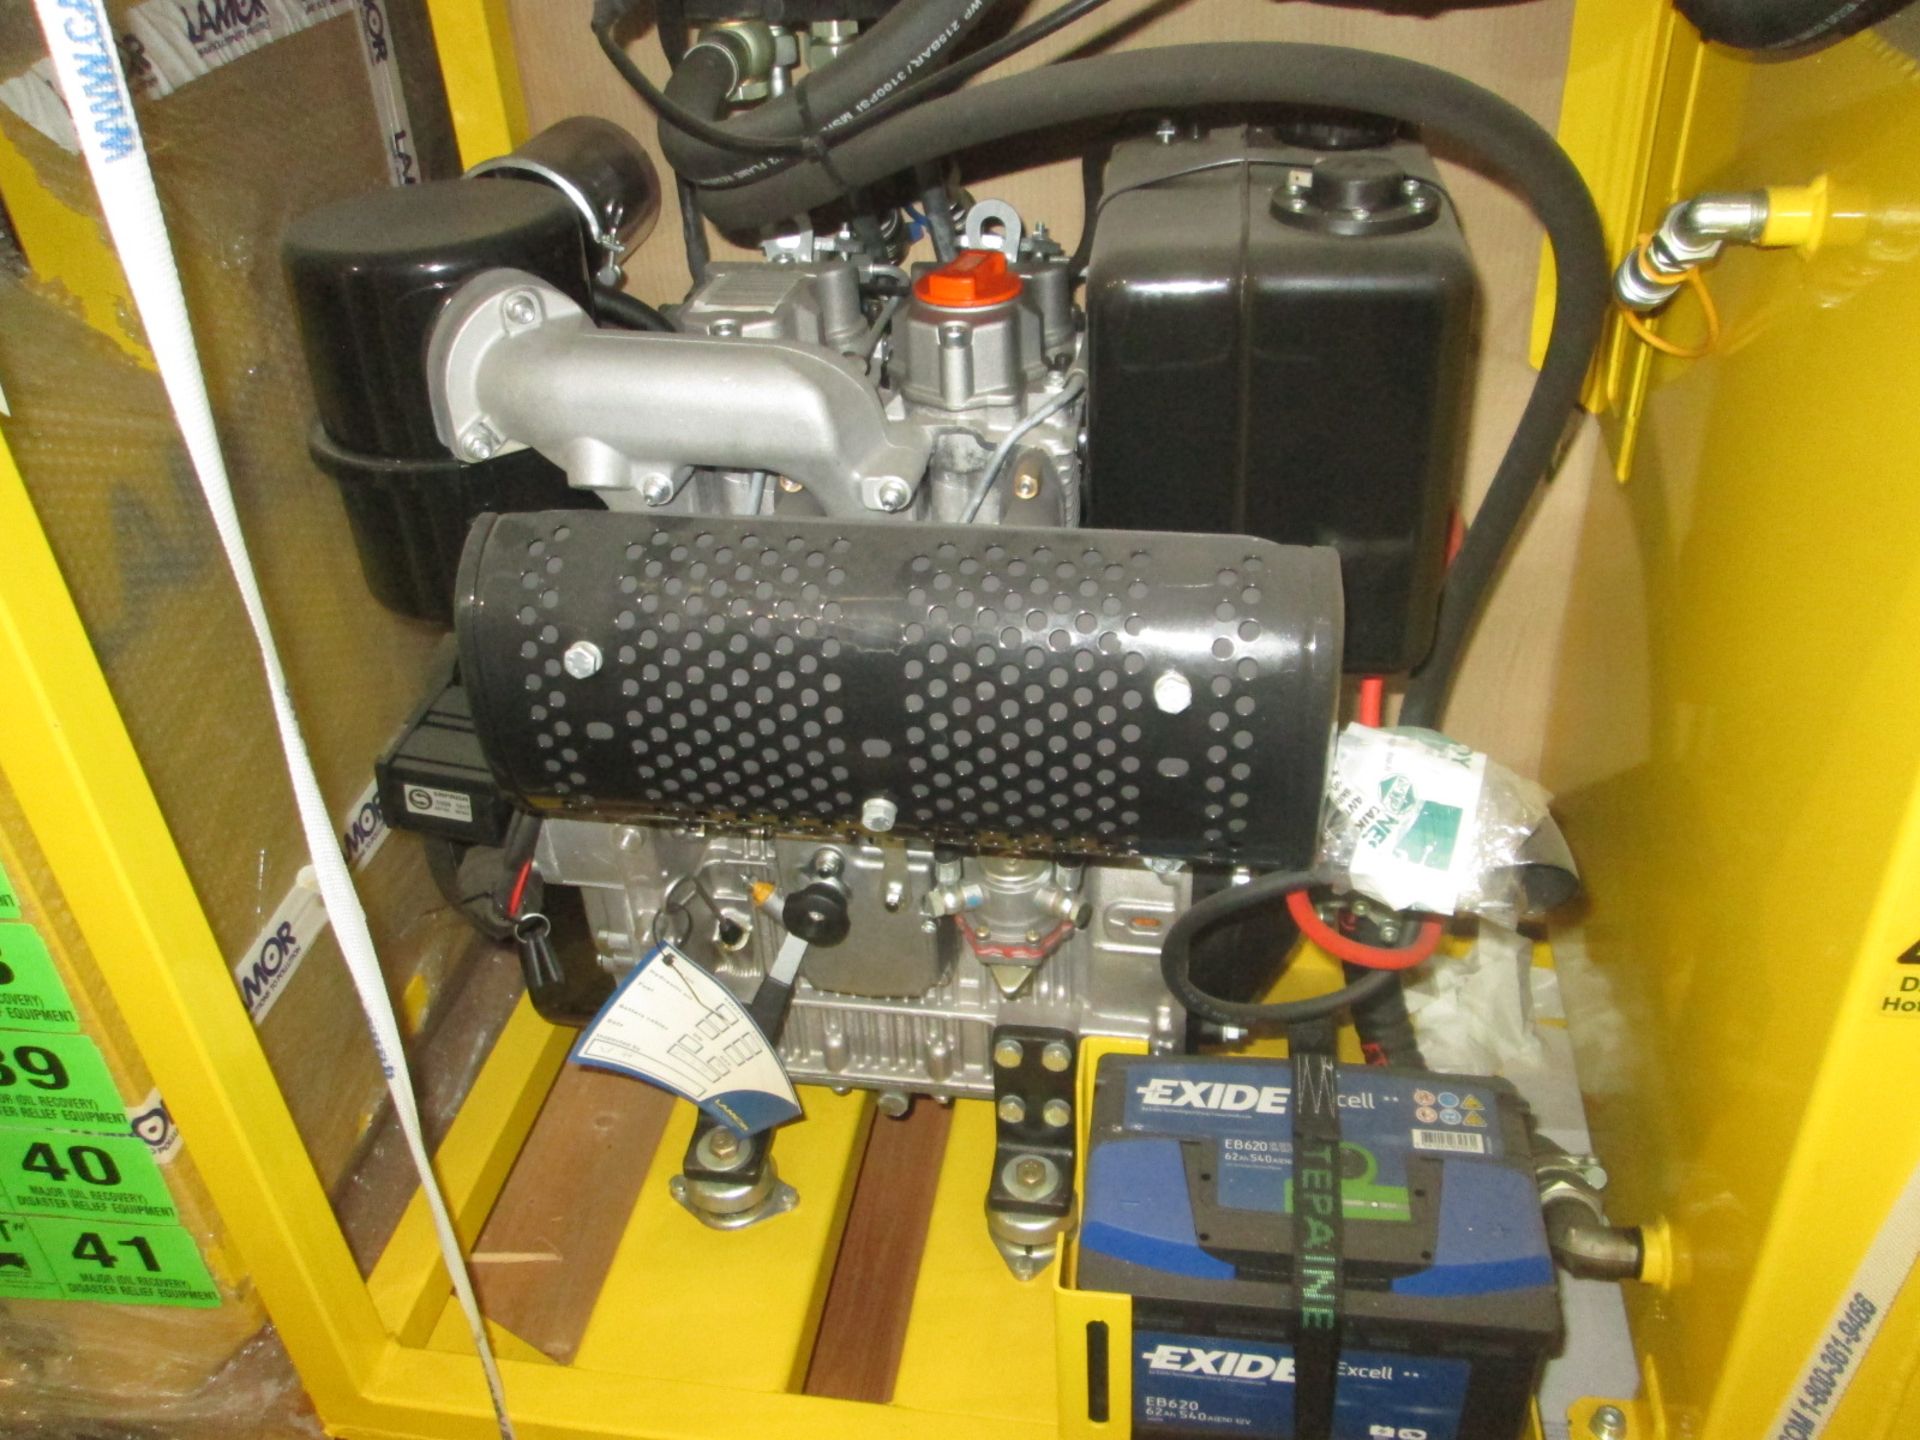 LAMOR SLICKBAR LPP 19 ENCLOSED HYDRAULIC POWER PACK WITH LOMBARDINI DIESEL ENGINE AND ELECTRIC START - Image 3 of 3